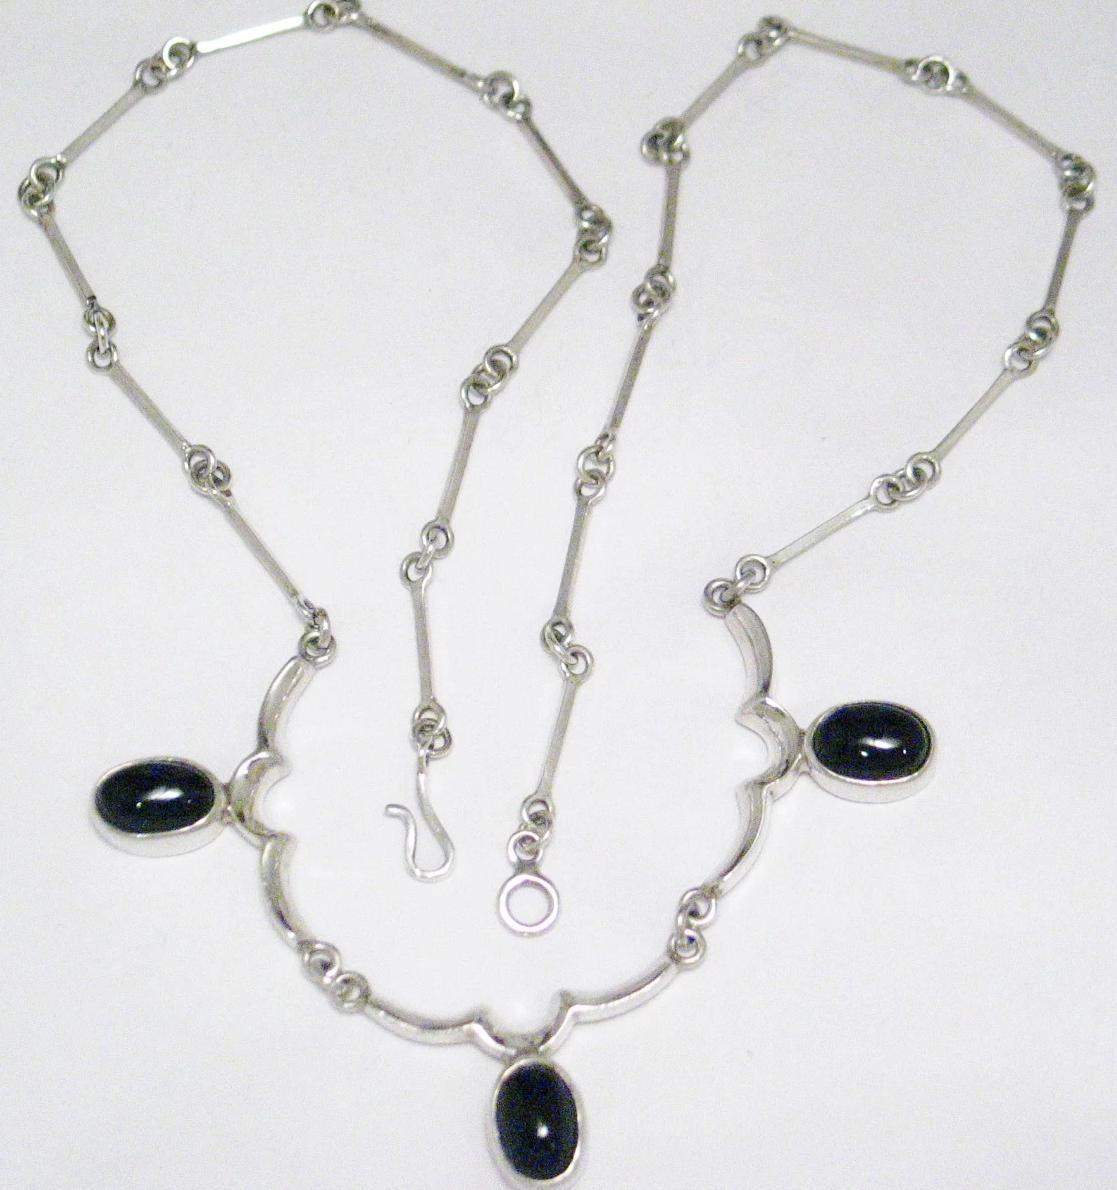 Silver Necklaces | Sterling Scallop & Dog bone Link Black Onyx Stone Necklace 17 3/4" | Best  Priced Estate Jewelry for less only at Blingschlingers.com